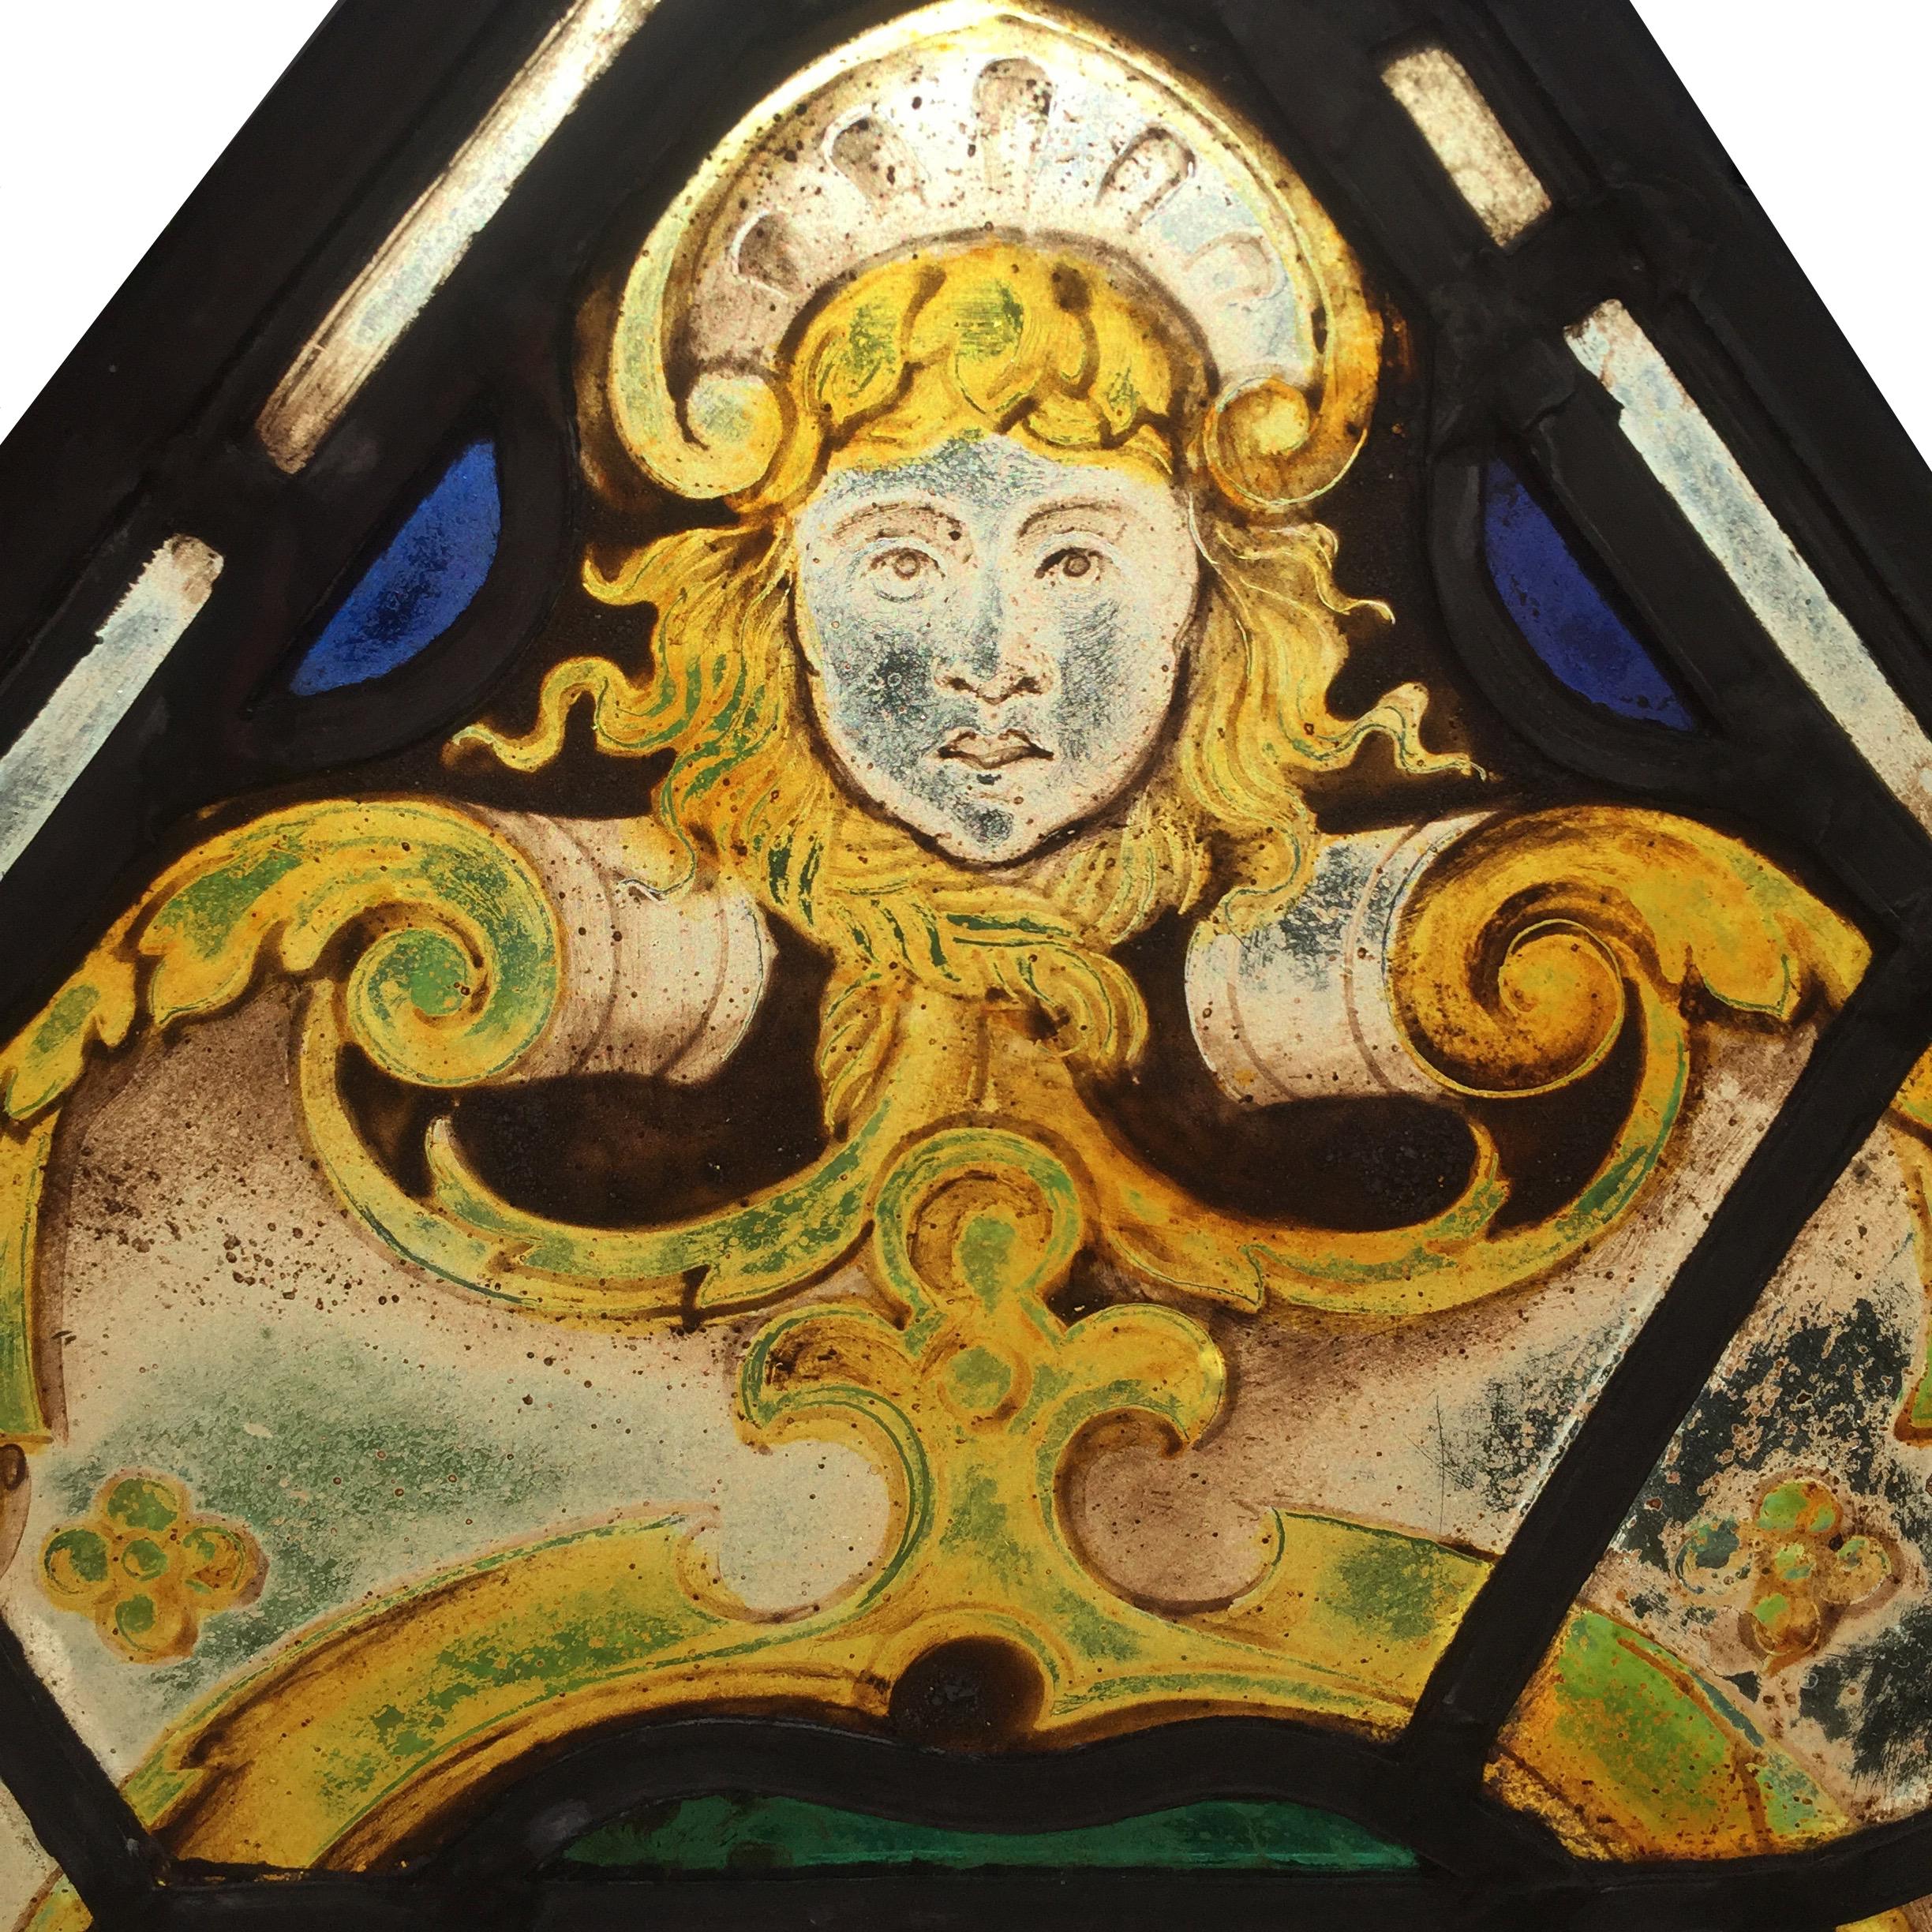 A very decorative section of hand-painted English stained glass, depicting a face and three wheatsheafs. 

The lower section of the panel reads 